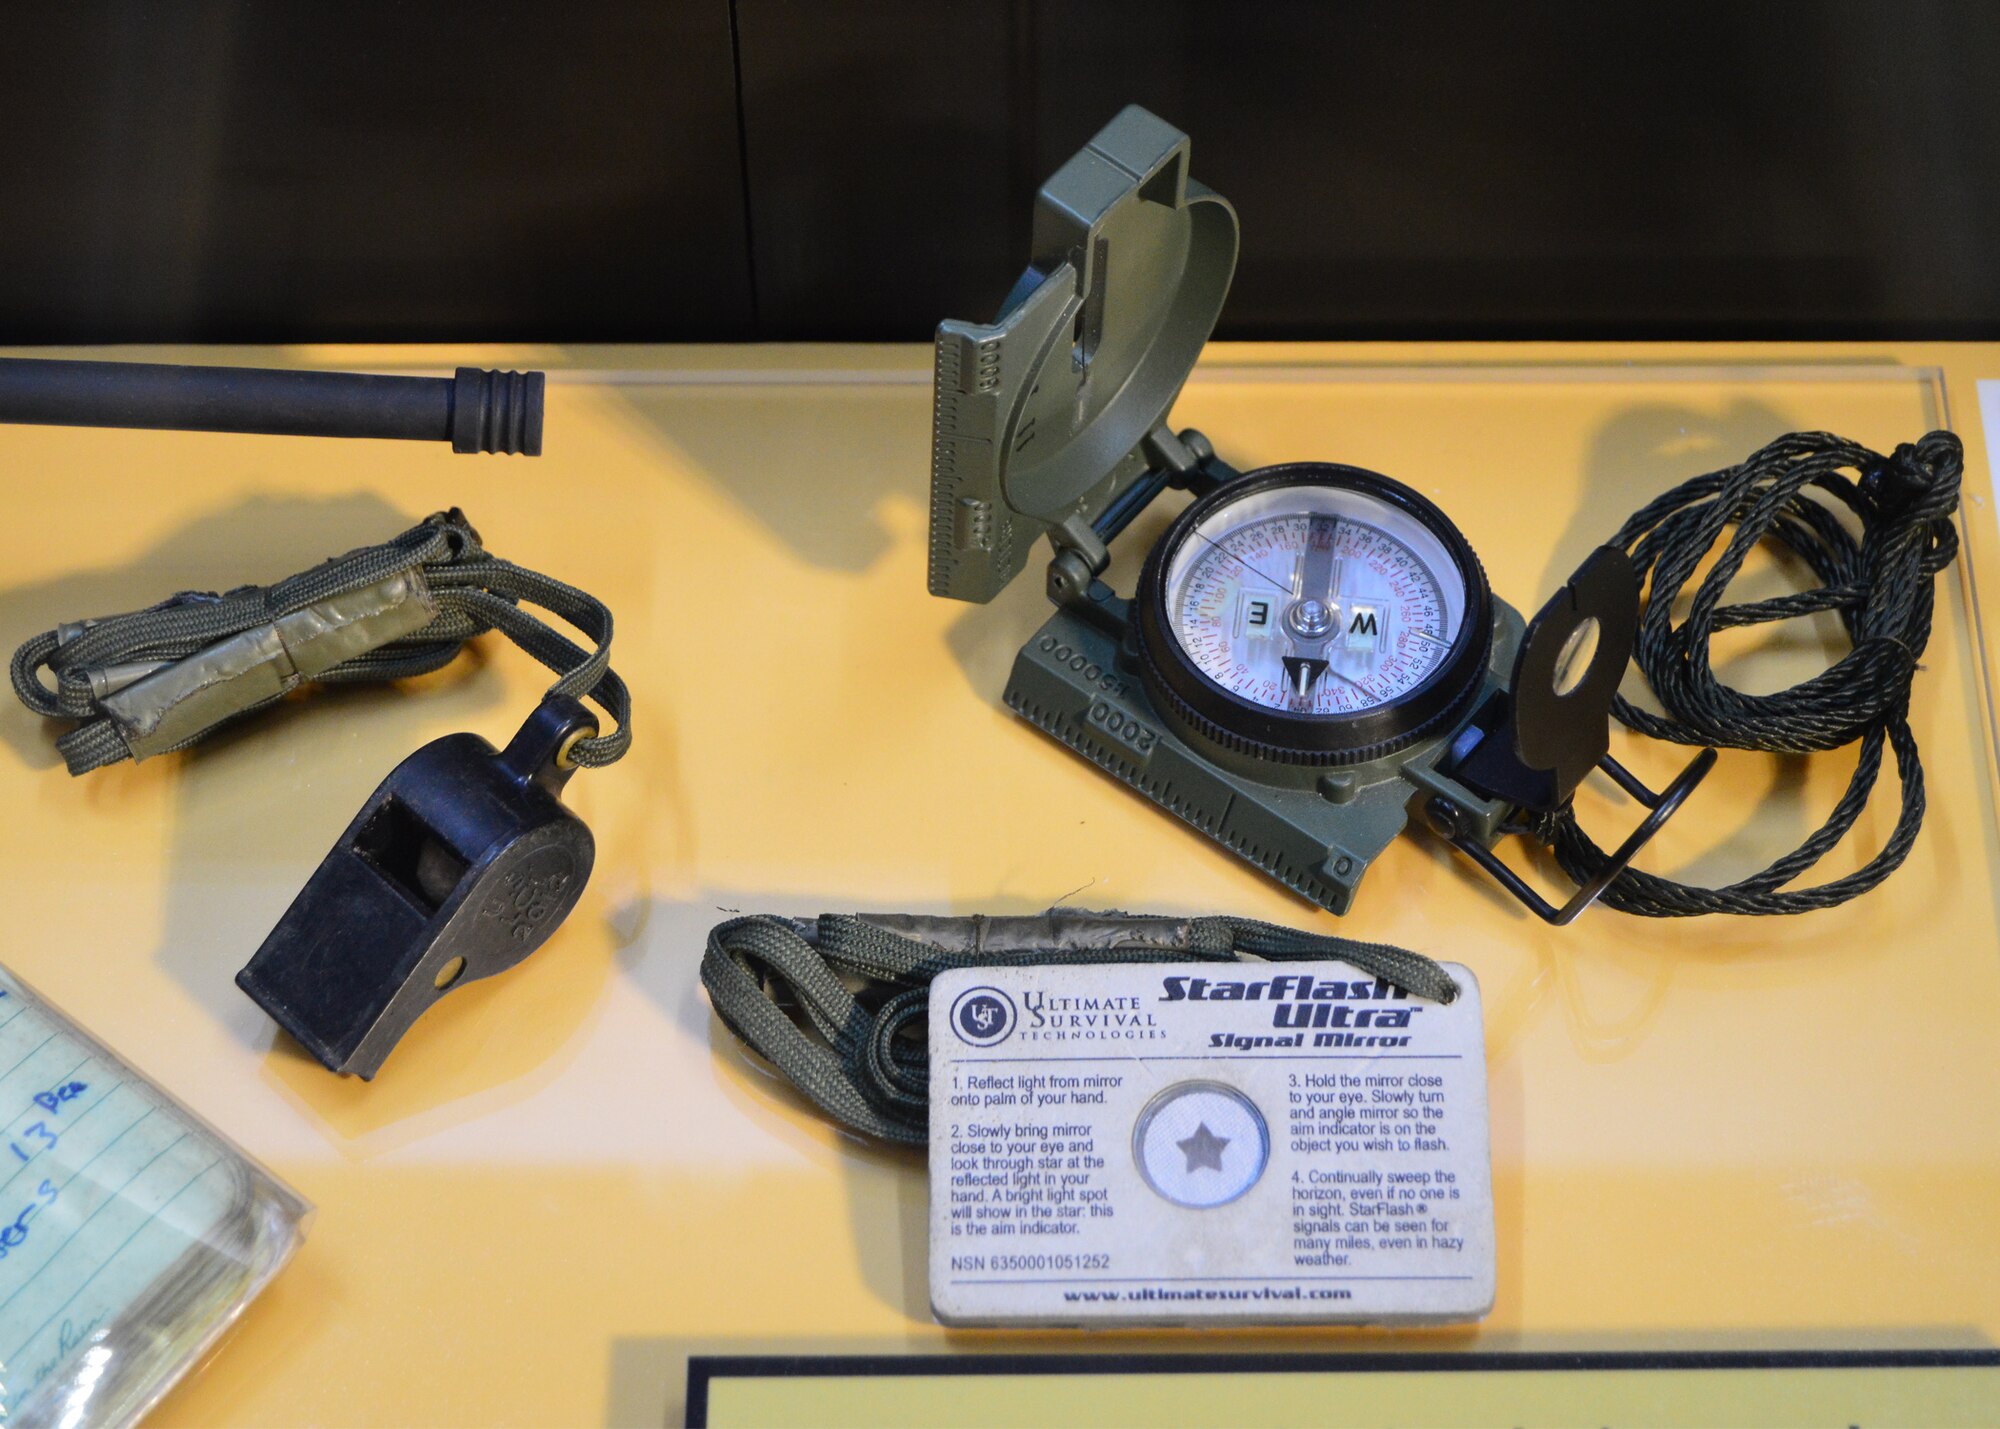 DAYTON, Ohio -- The "Duty First, Always Ready" exhibit, located in the Cold War Gallery at the National Museum of the U.S. Air Force, highlights the service of Senior Airmen Michael Malarsie and Bradley Smith, a two-man Joint Terminal Attack Controller (JTAC) who deployed together to Afghanistan in December 2009. Here are the compass, whistle and signal mirror used by Senior Airman Smith. (U.S. Air Force photo)
